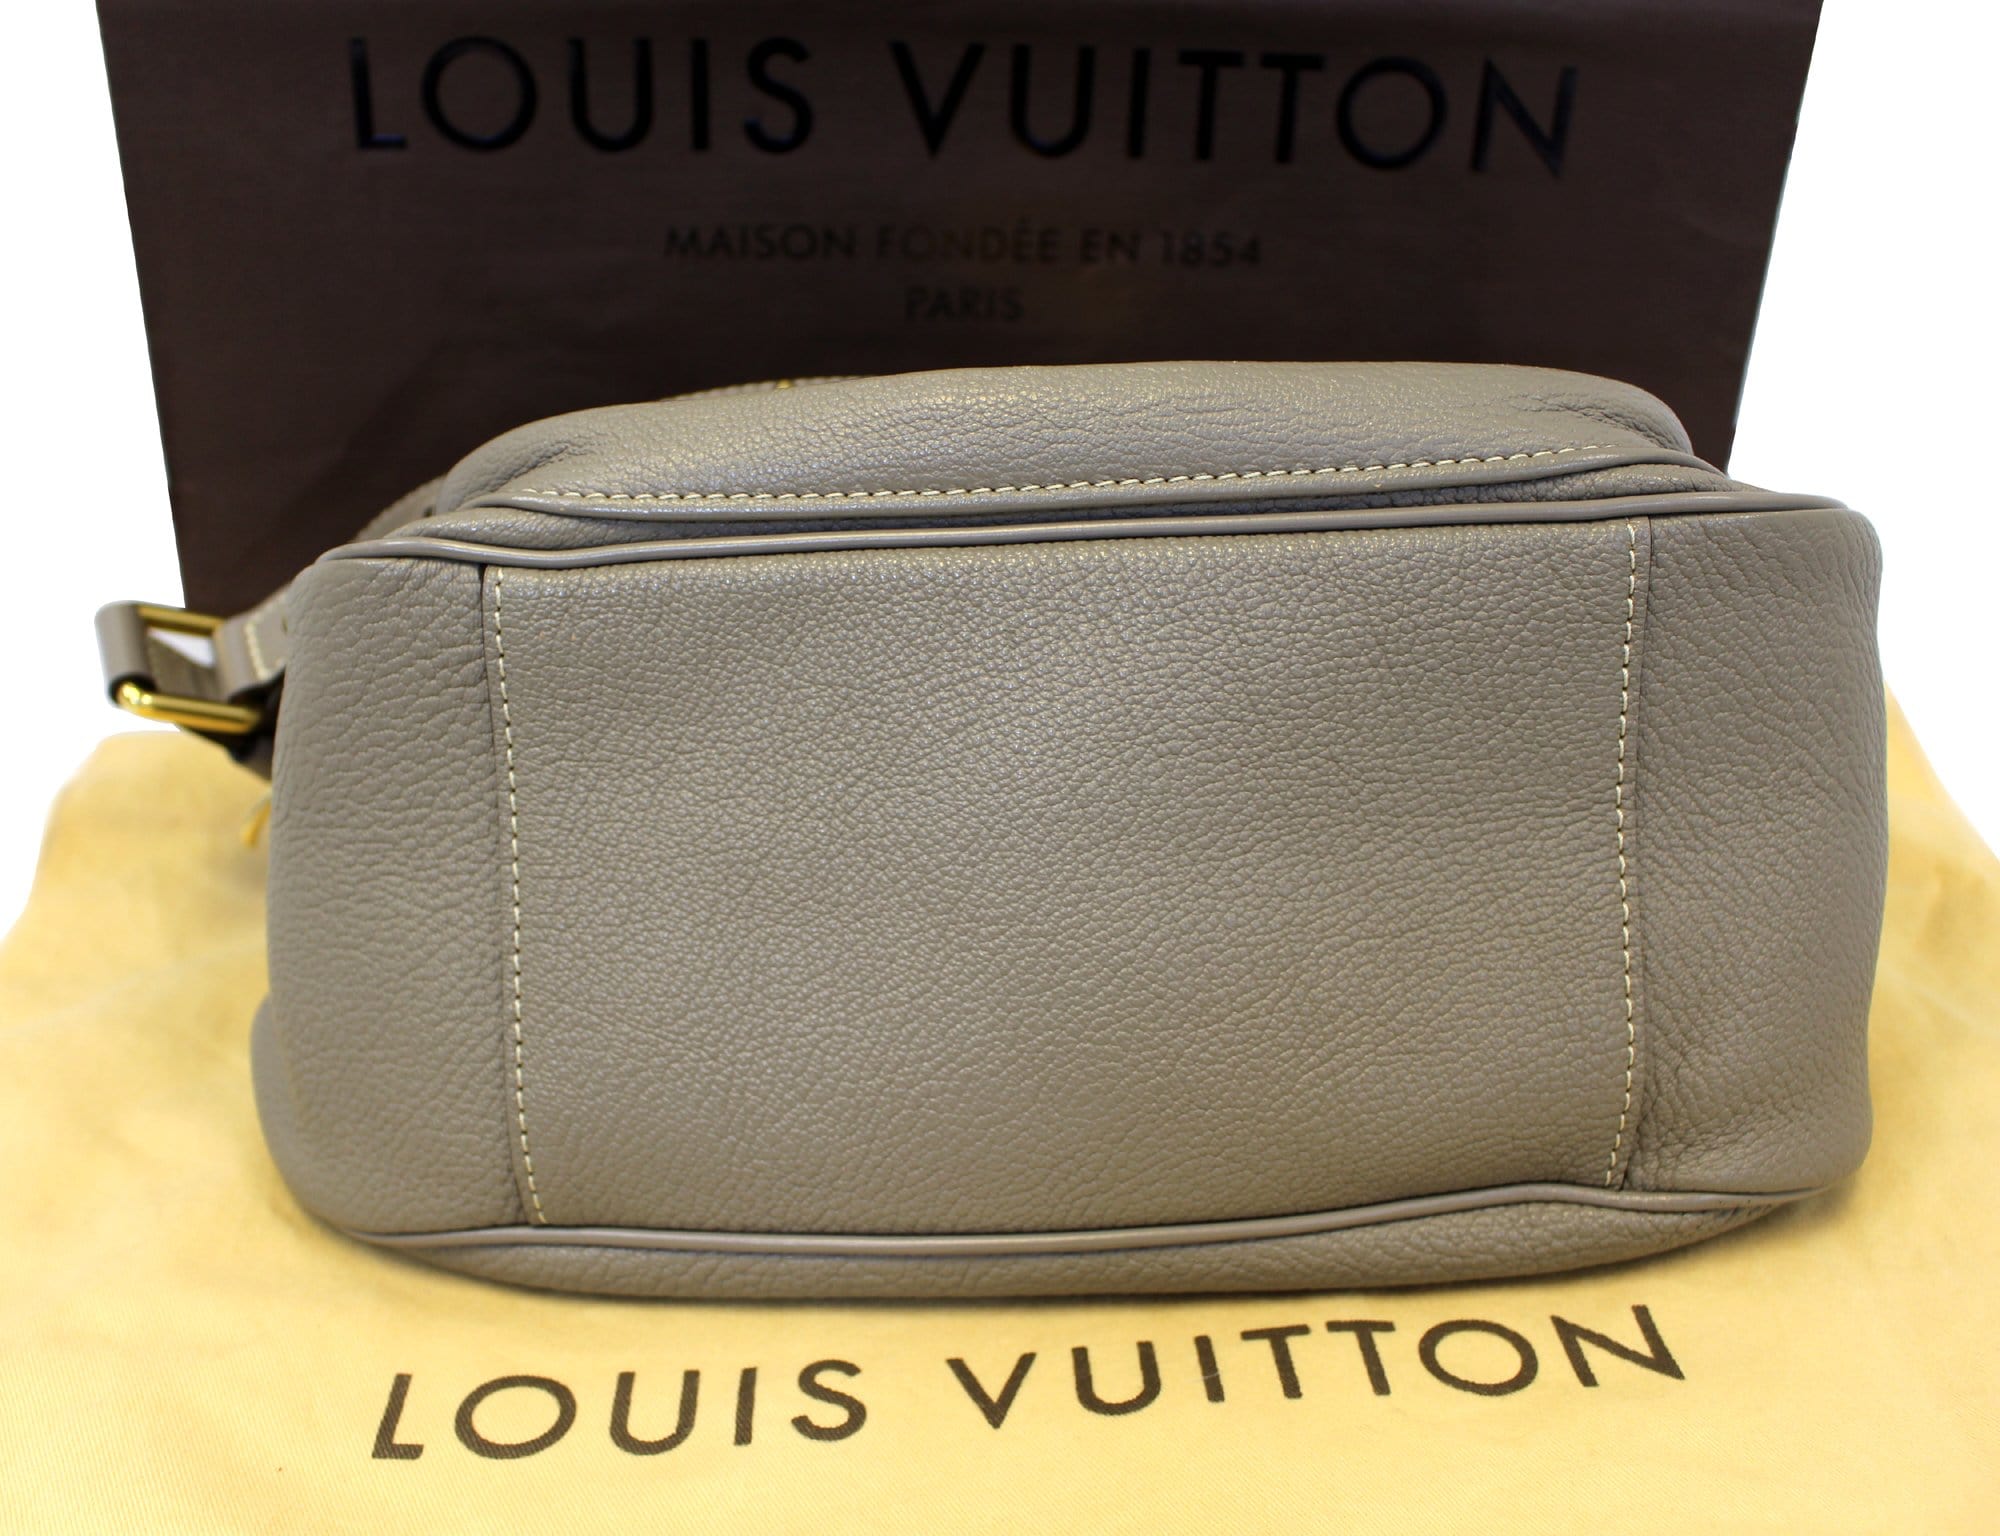 Louis Vuitton Verone Suhali Leather Lockit PM Bag - LabelCentric